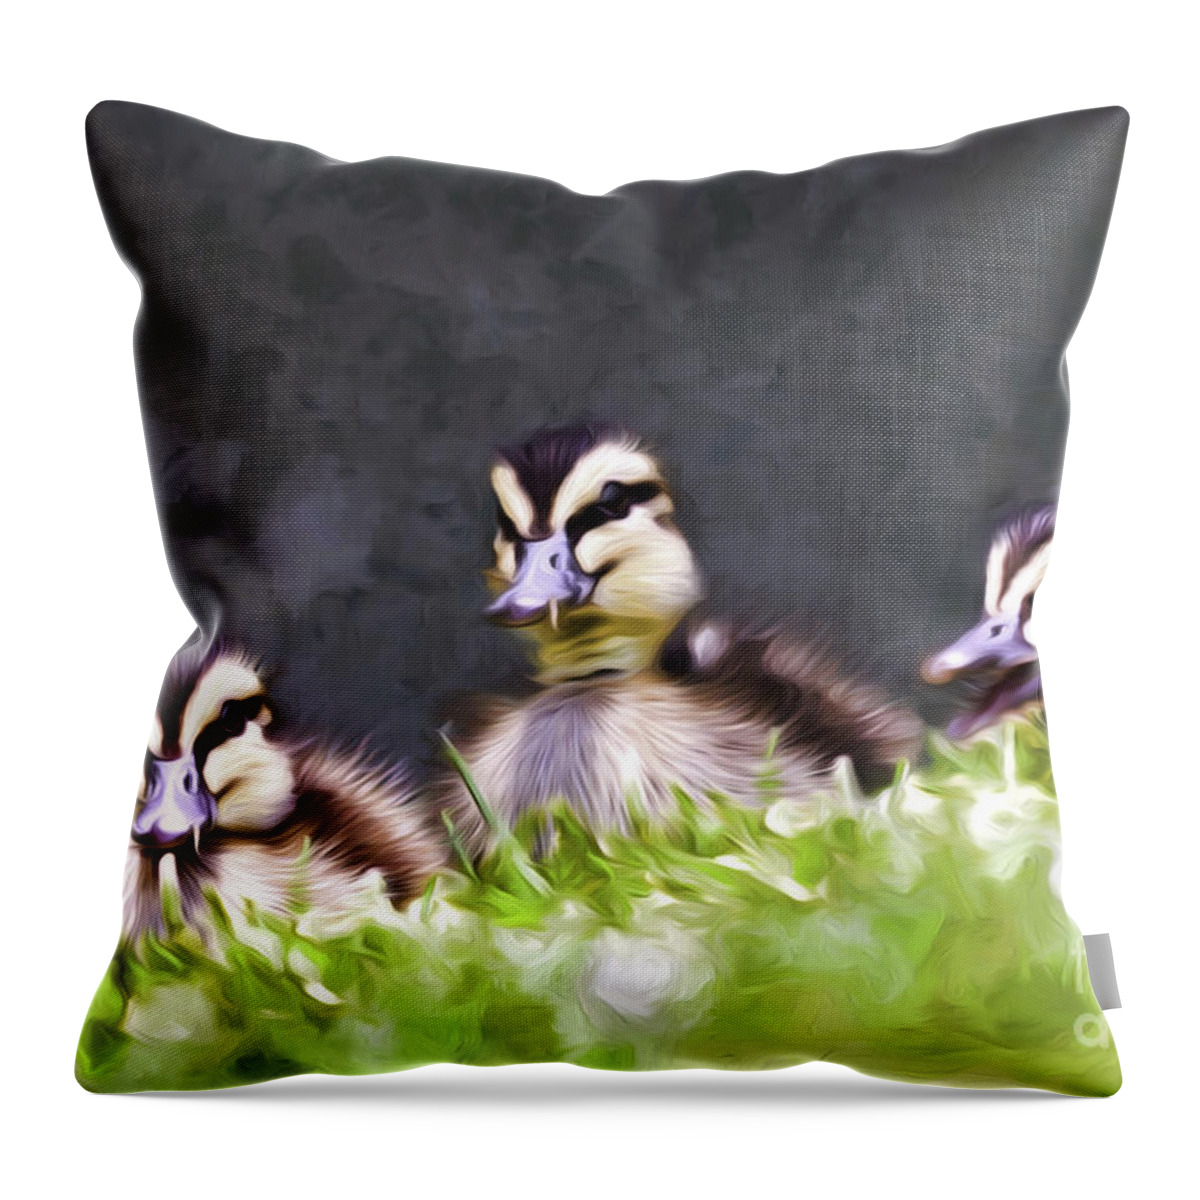 Pacific Black Ducklings Throw Pillow featuring the photograph Ducklings by Sheila Smart Fine Art Photography